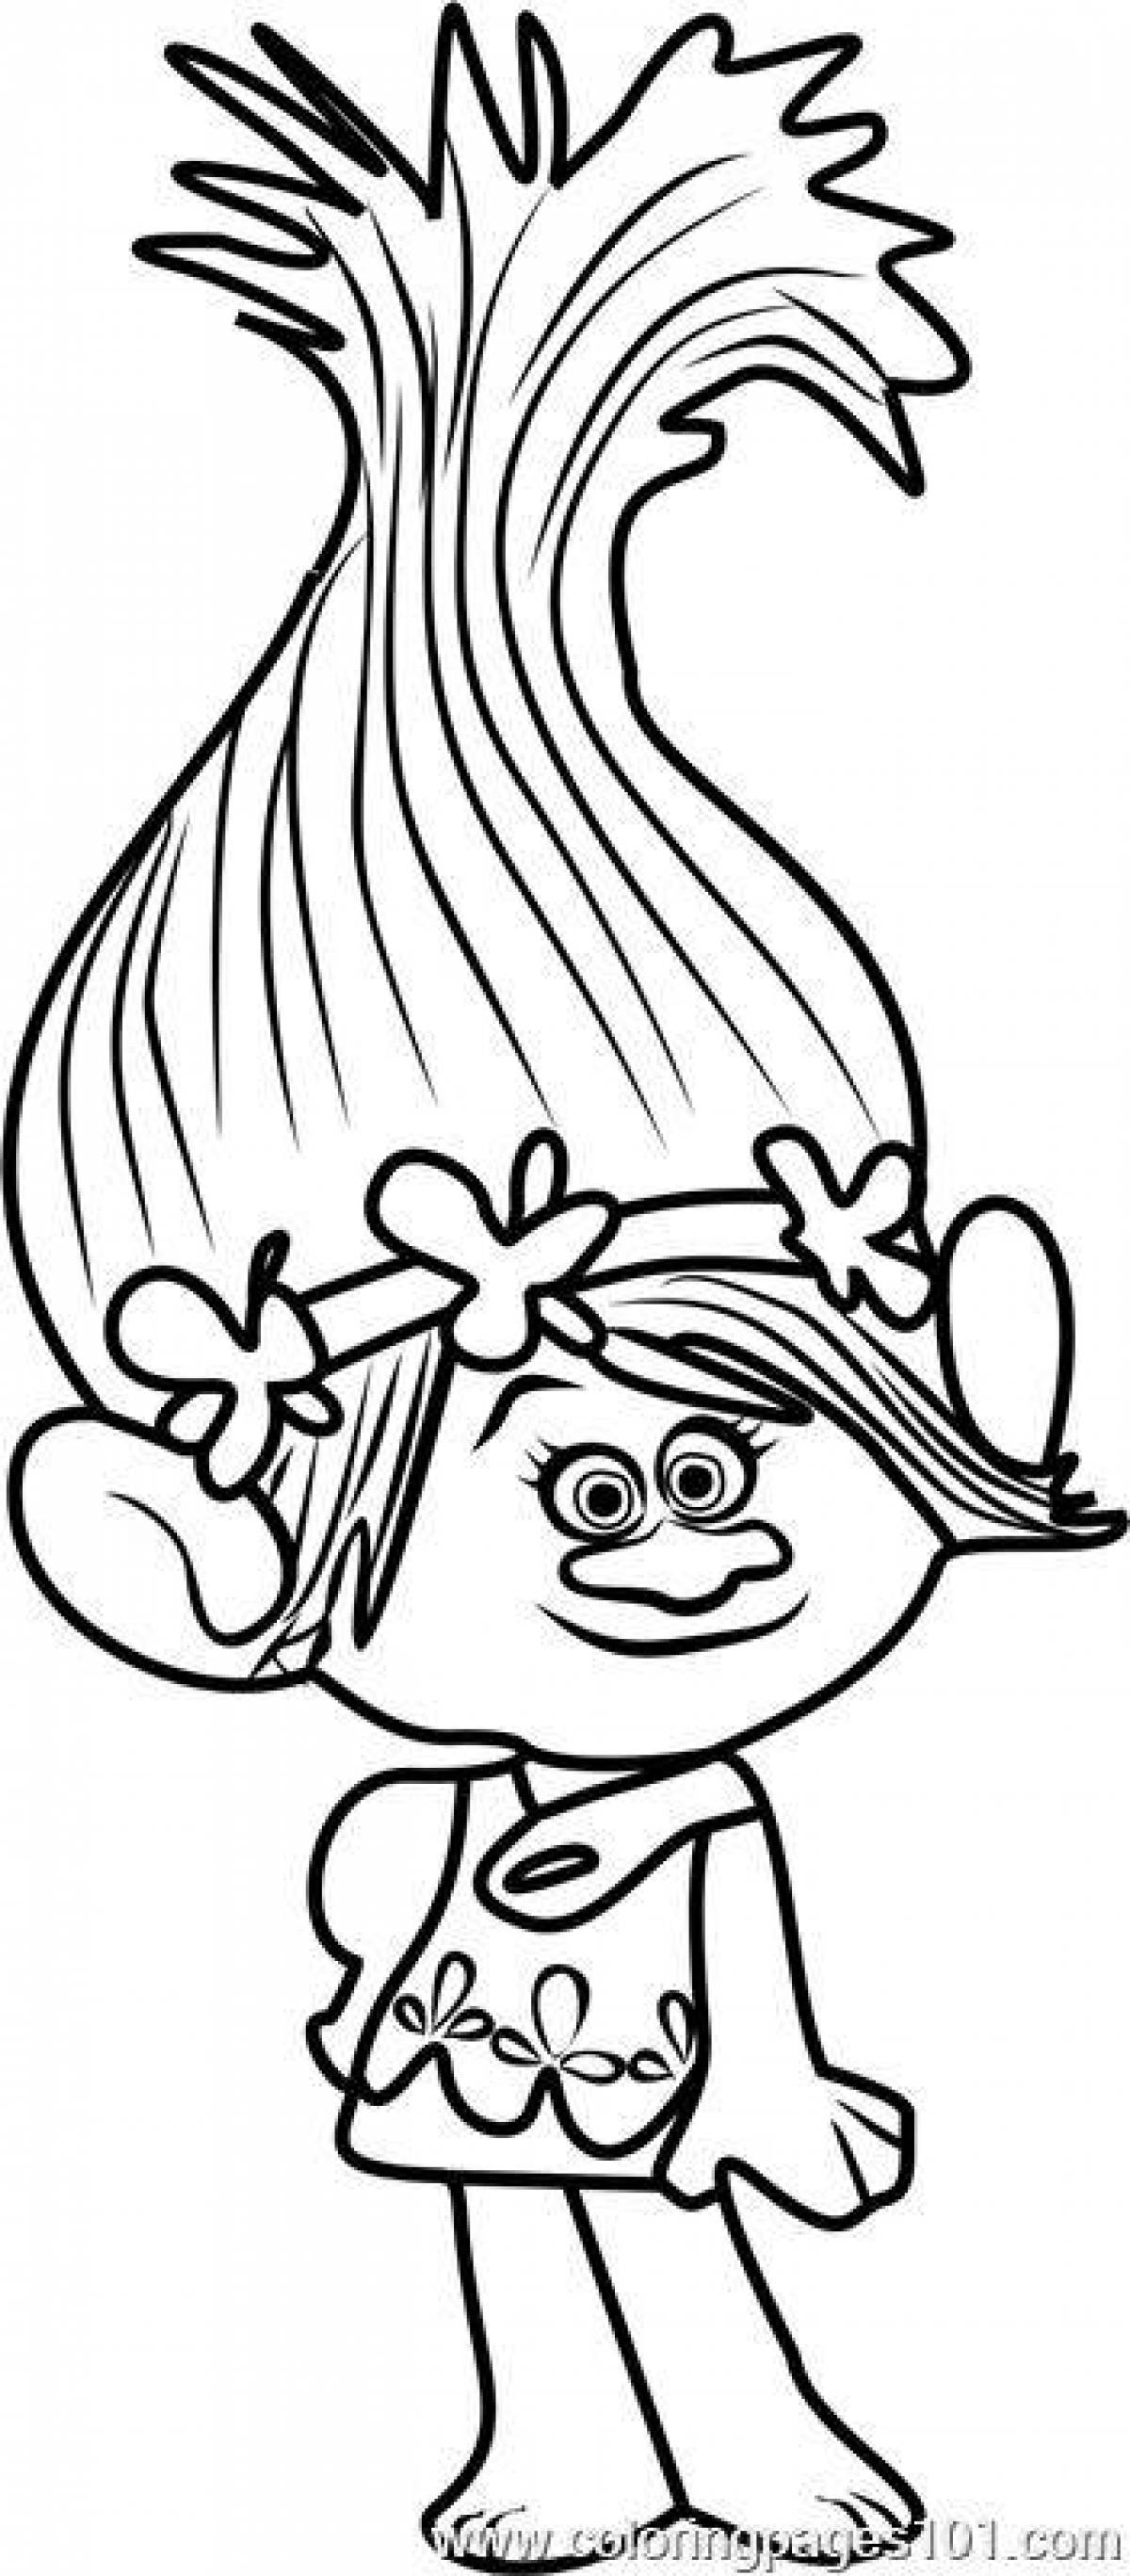 Playful troll roses coloring page